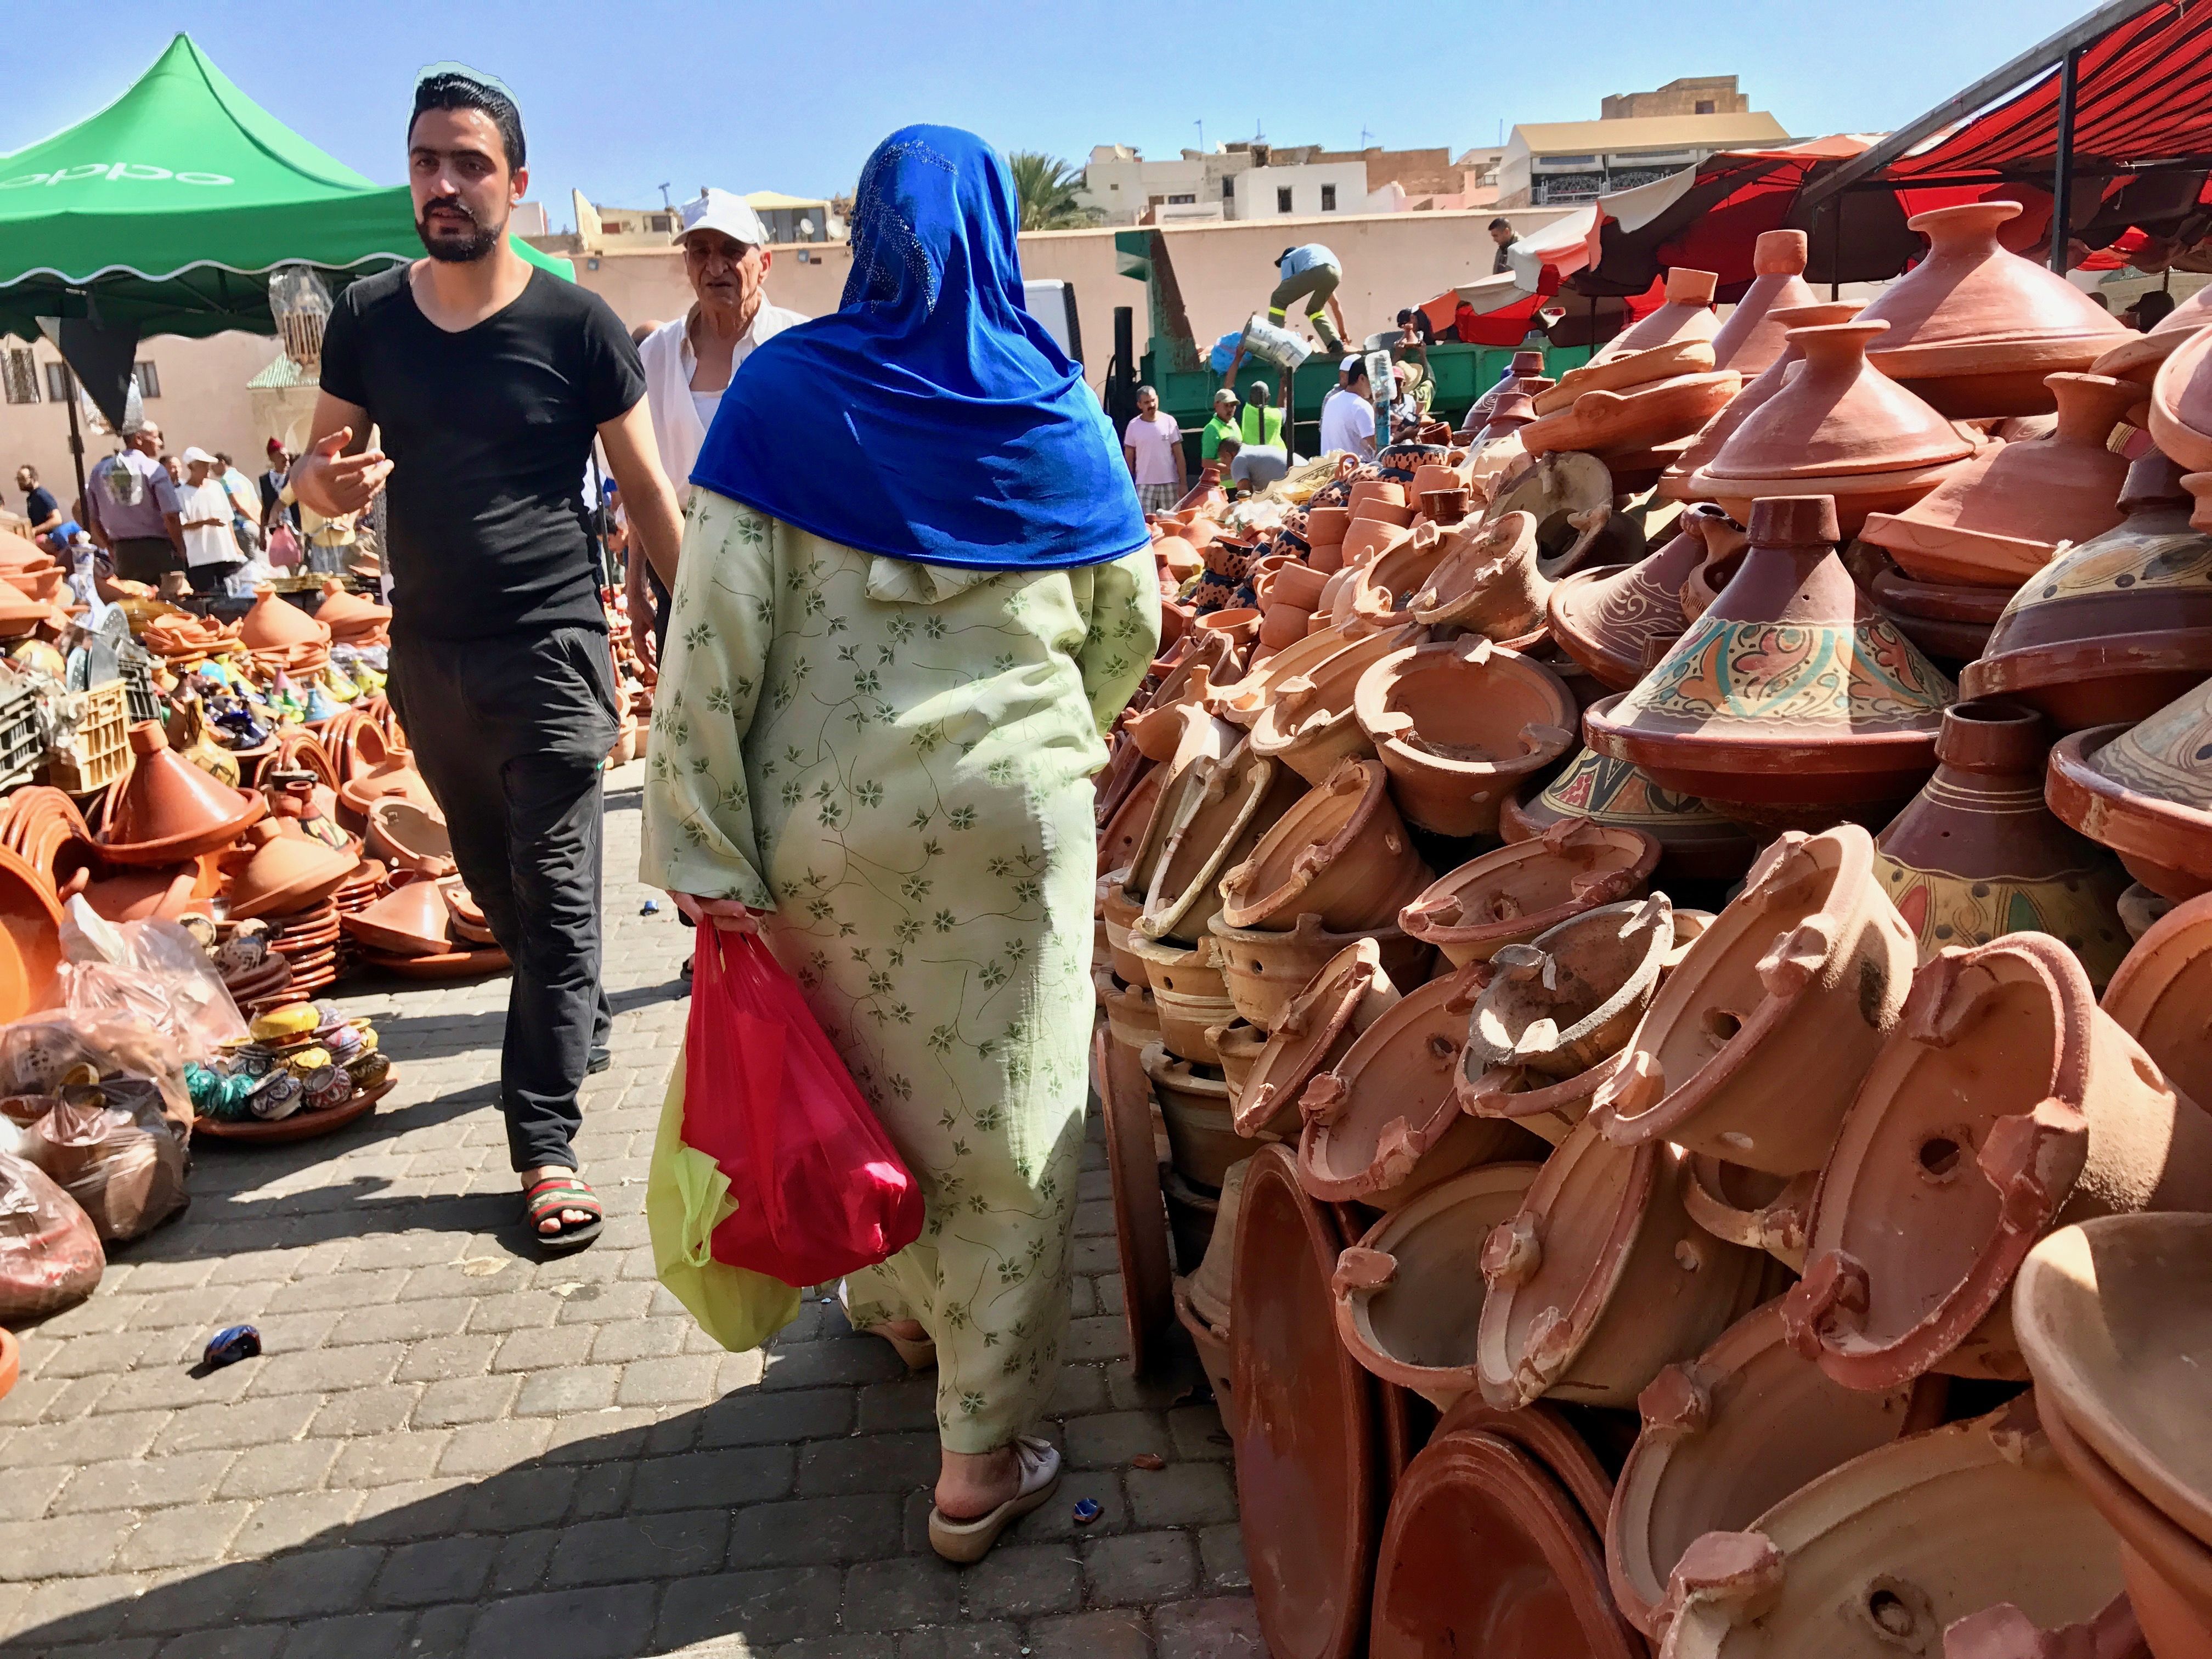 A shopper carries goods in cloth bags after leaving the medina in Meknes, Morocco. The most visible sign of the country’s green policy efforts are on the streets of the old medinas, in the vegetable shops, and in the large supermarkets of the big cities. In 2016, Morocco banned the sale, use, and production of plastic bags. Before the ban, Morocco used 3 billion plastic bags a year, making it the second largest consumer after the US, according to environmental groups. Image by Jackie Spinner. Morocco, 2017.